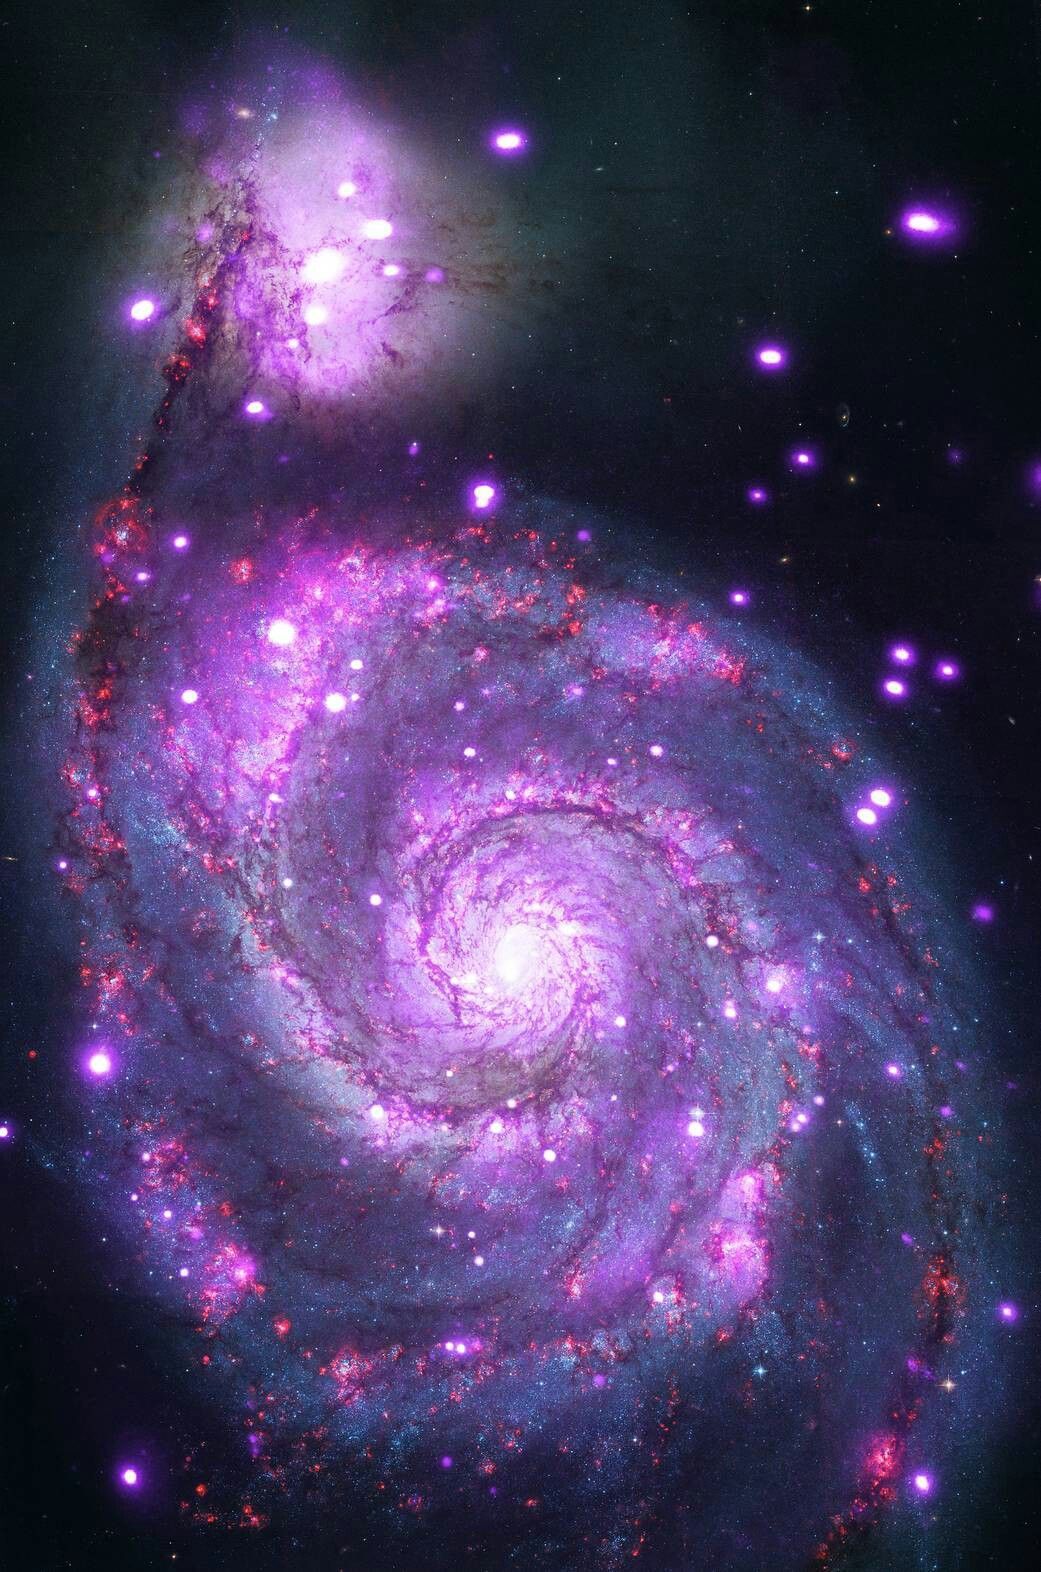 Messier 51 (M51) or NGC 5194, (Whirlpool Galaxy) - Messier 51 (M51) or NGC 5194, (Whirlpool Galaxy) -   13 beauty Images galaxy ideas